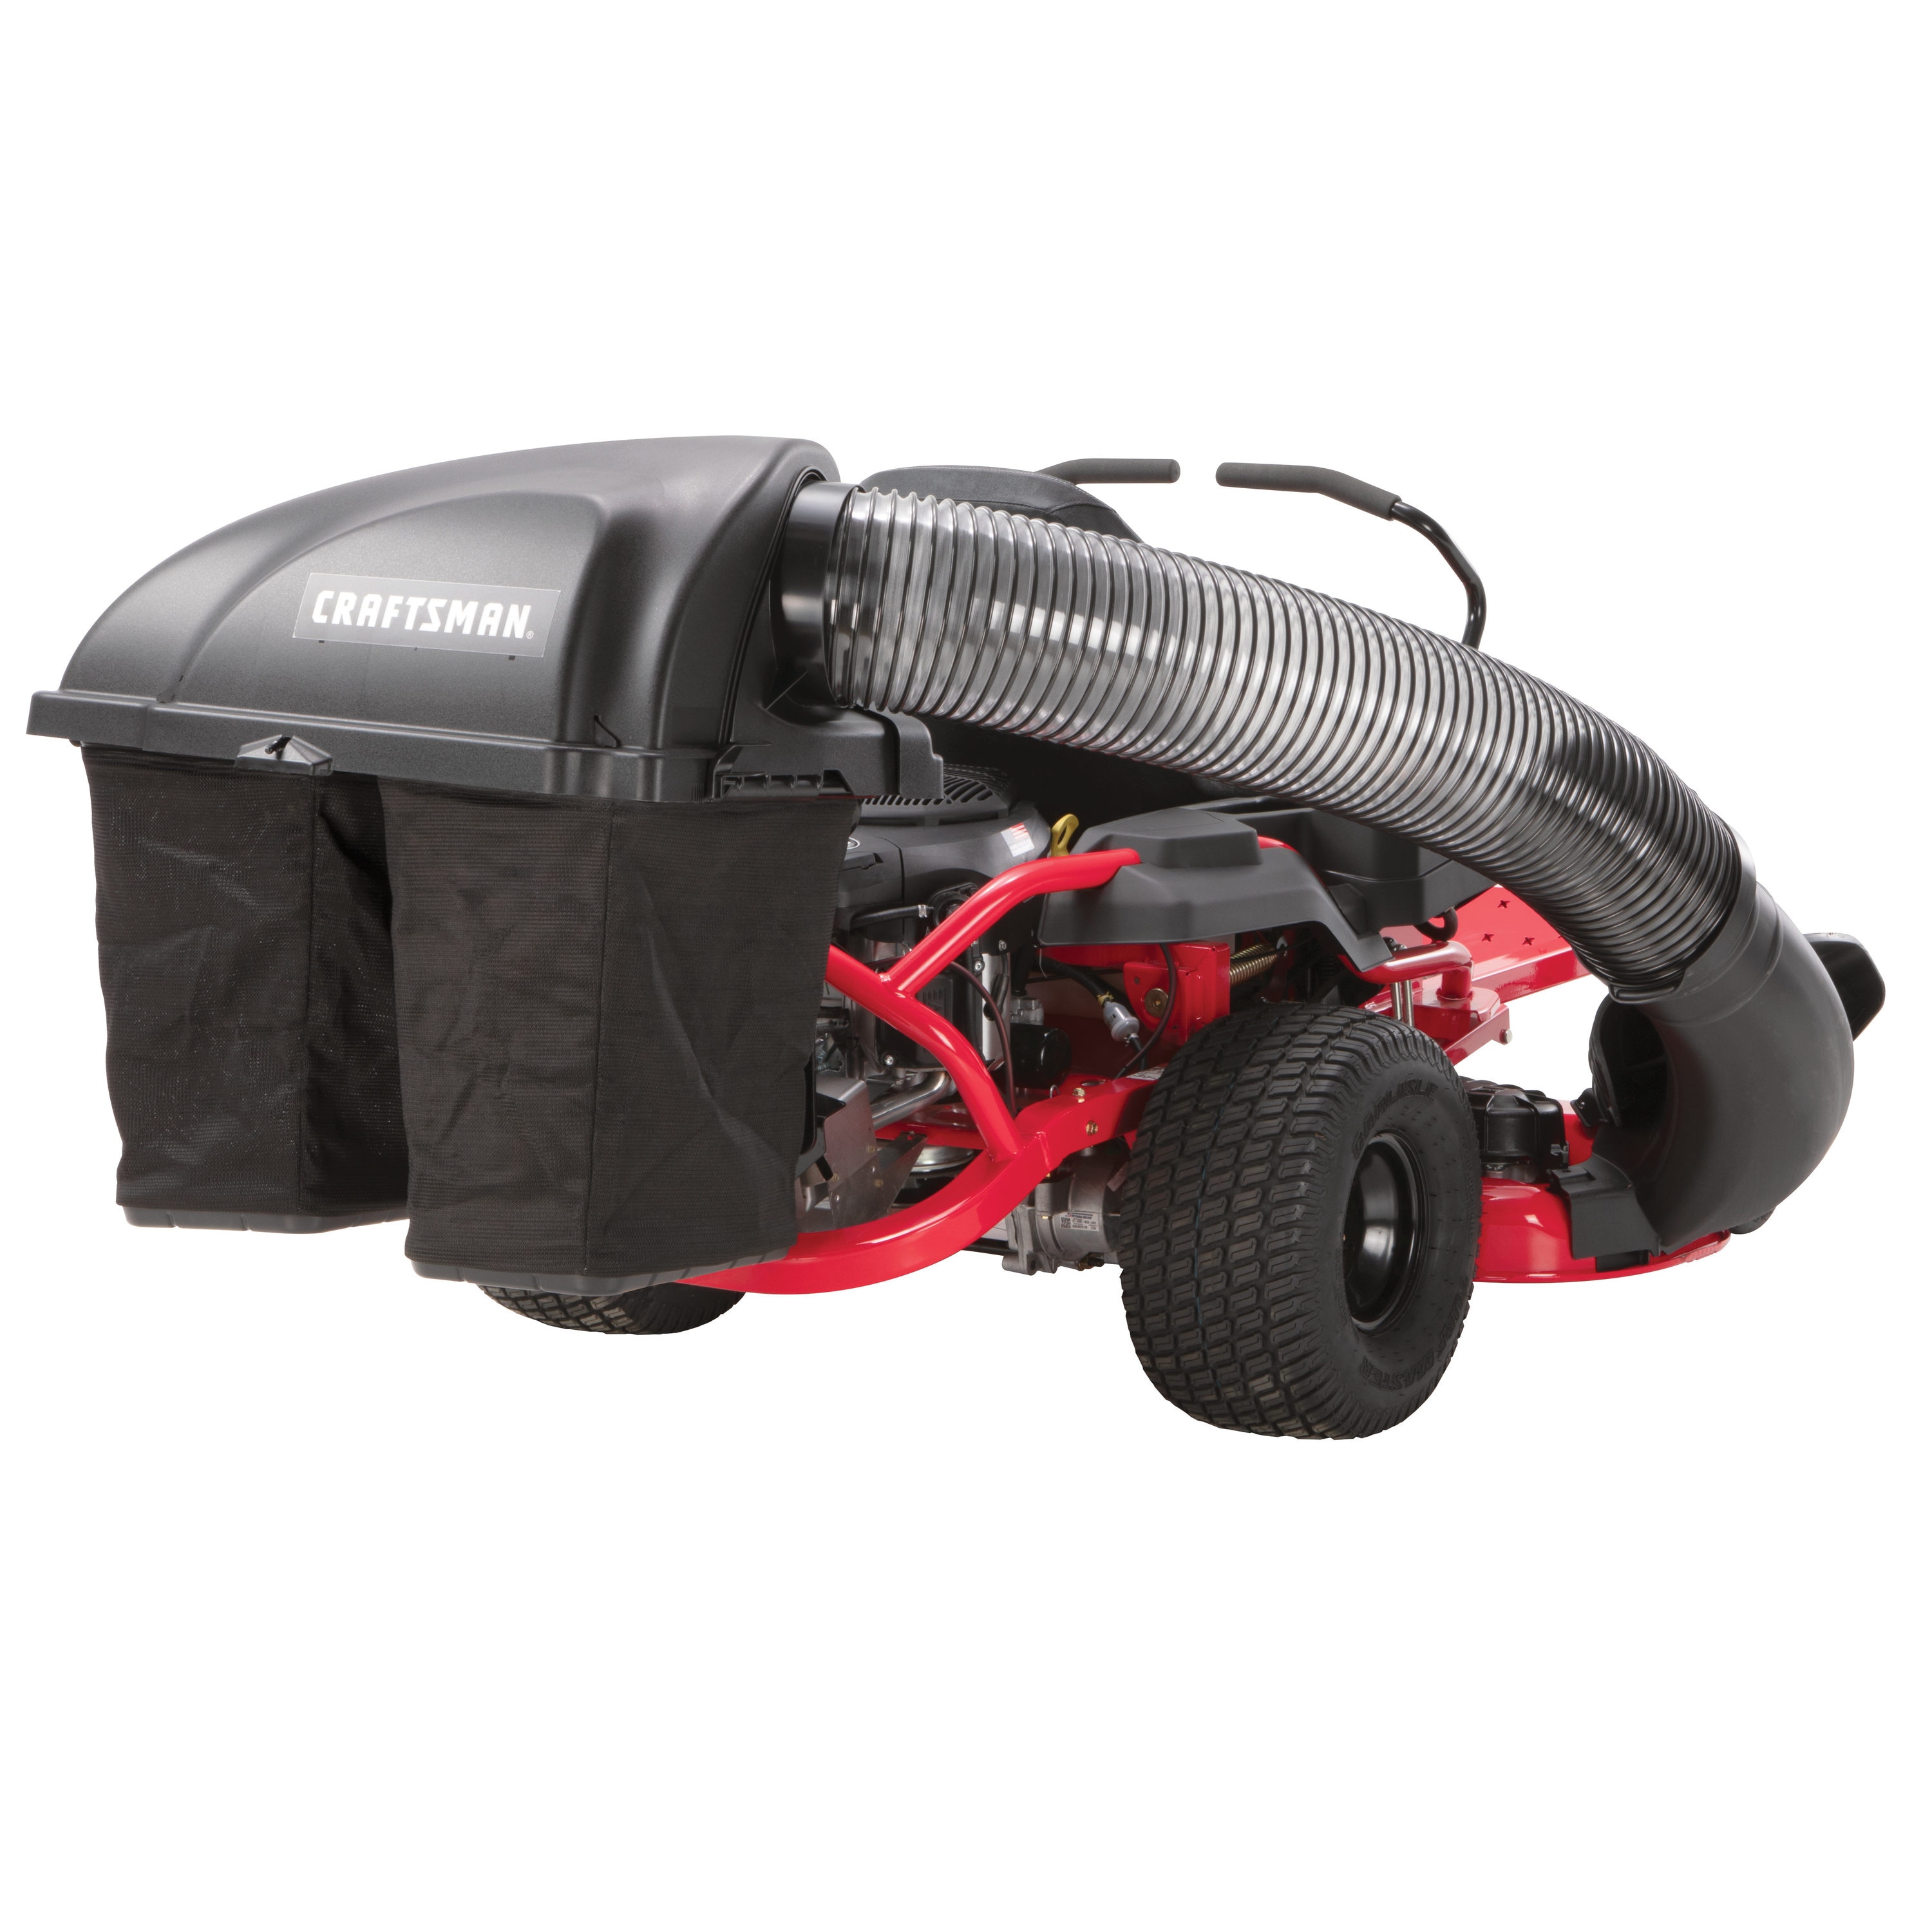 CRAFTSMAN Lawn Mower Parts & Accessories at